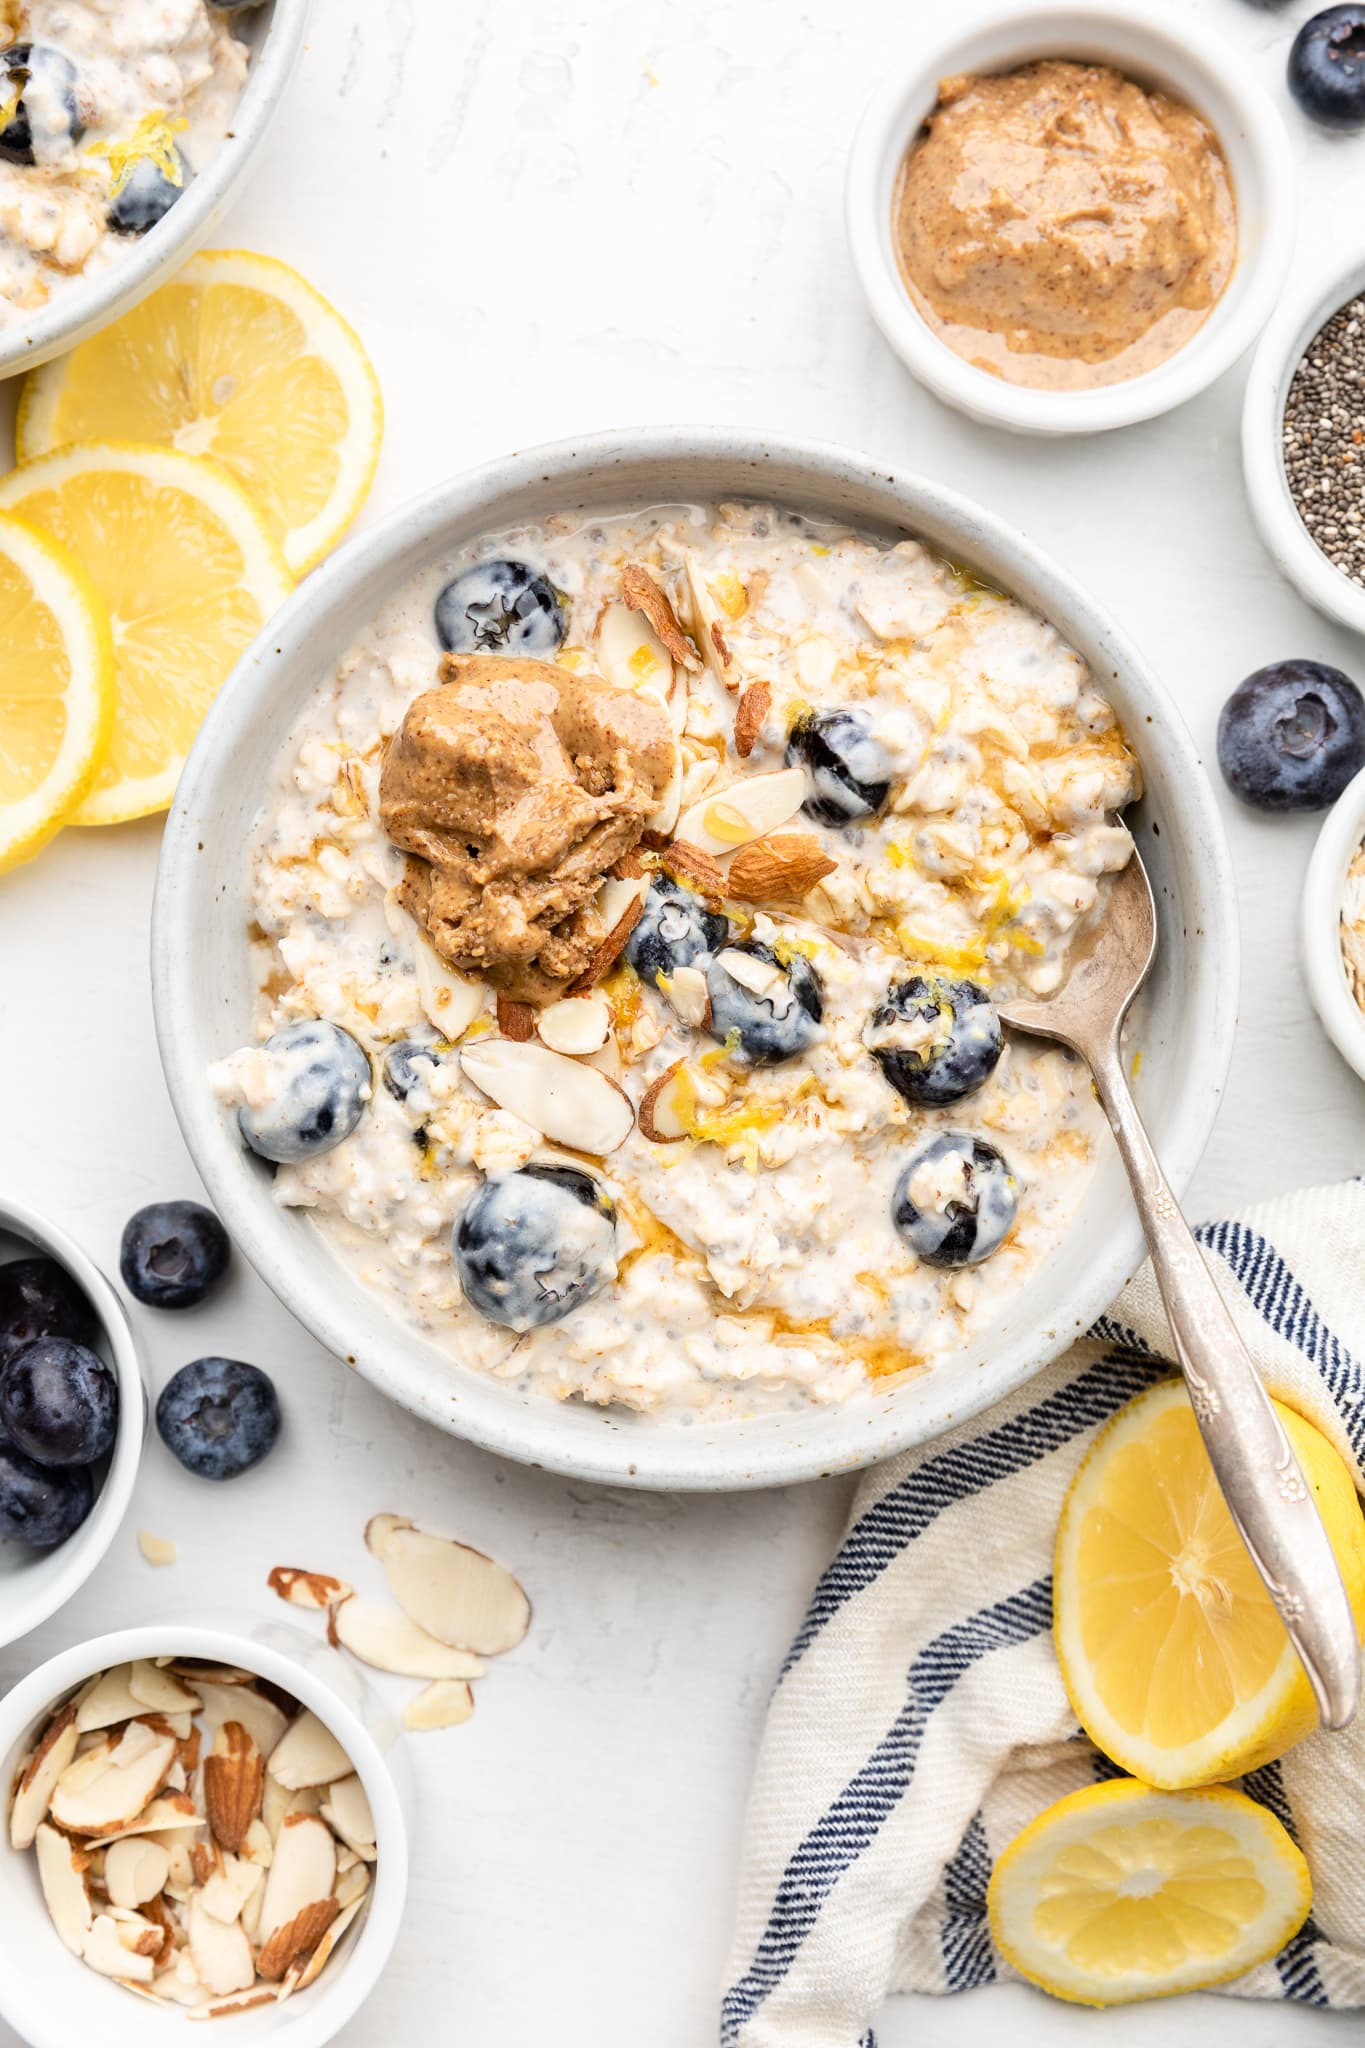 https://allthehealthythings.com/wp-content/uploads/2022/02/blueberry-overnight-oats-5.jpg